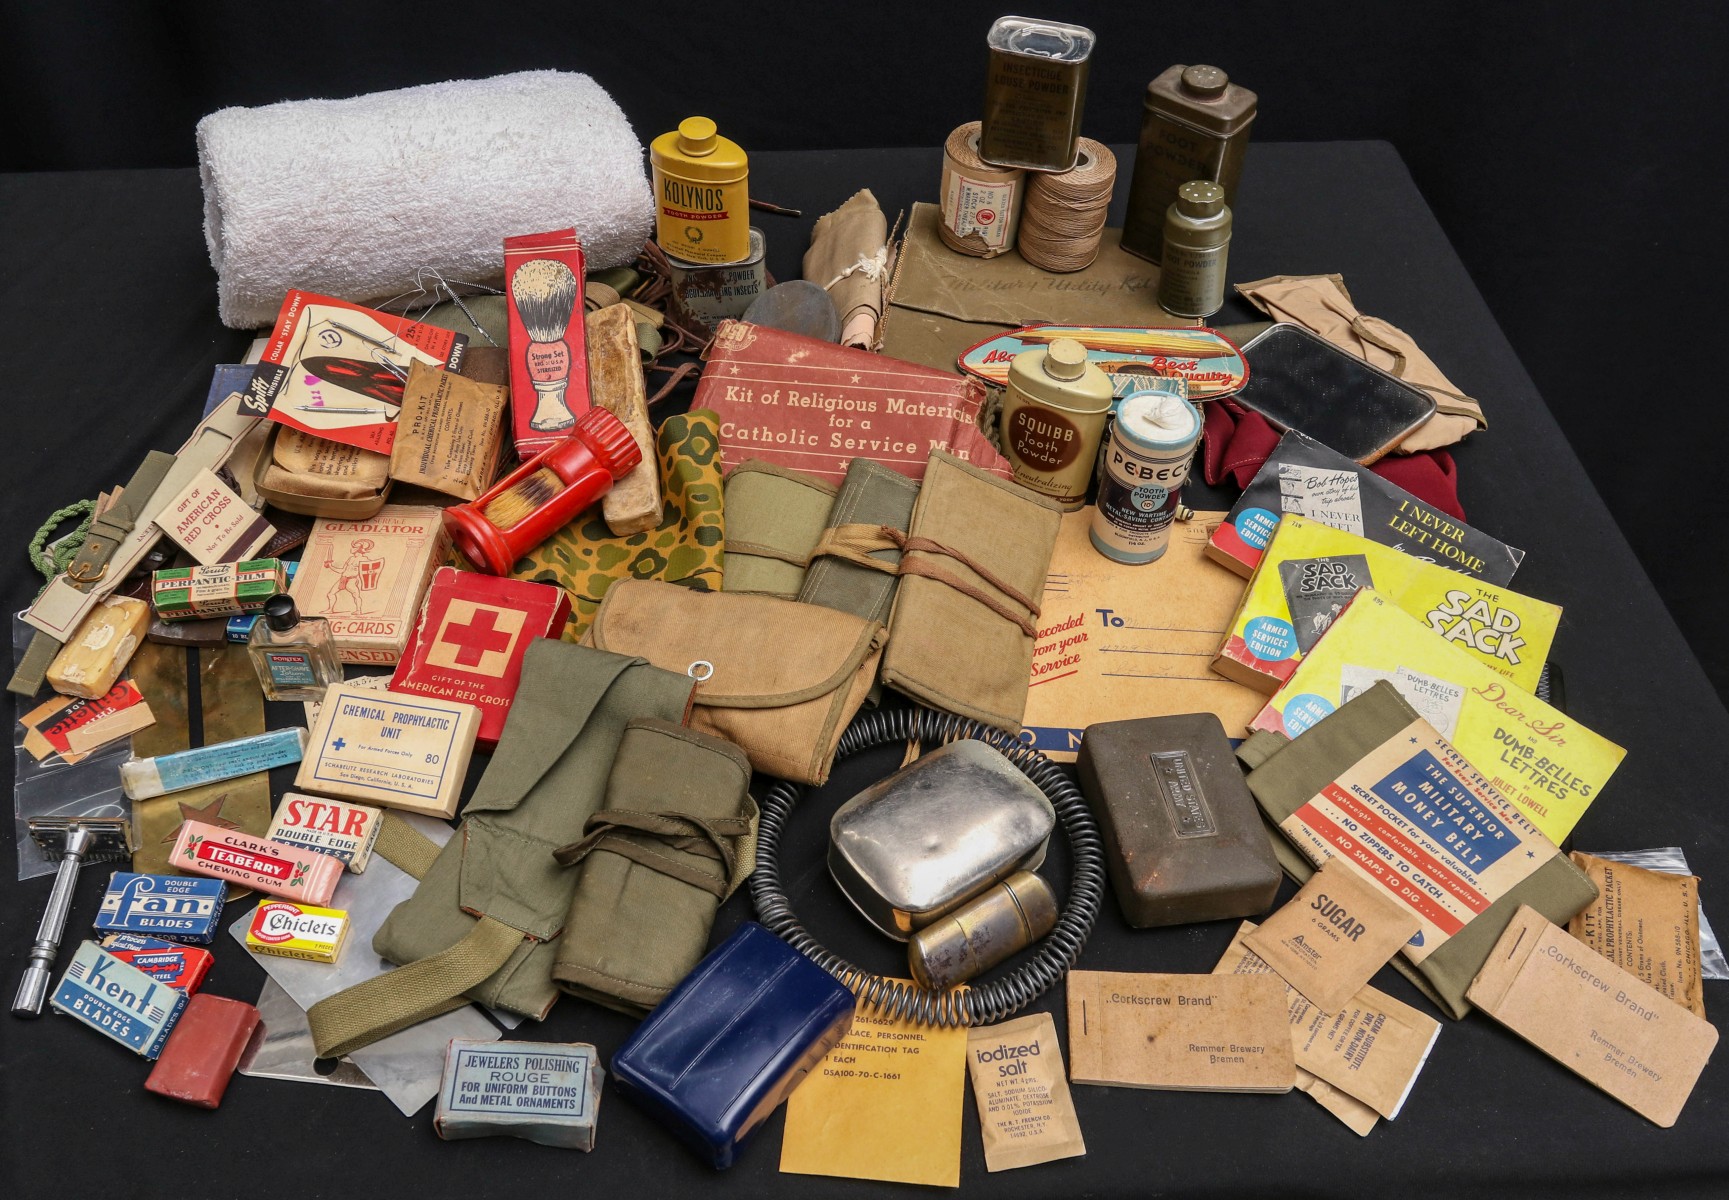 A LARGE COLLECTION OF WWII SOLDIER PERSONAL EFFECTS